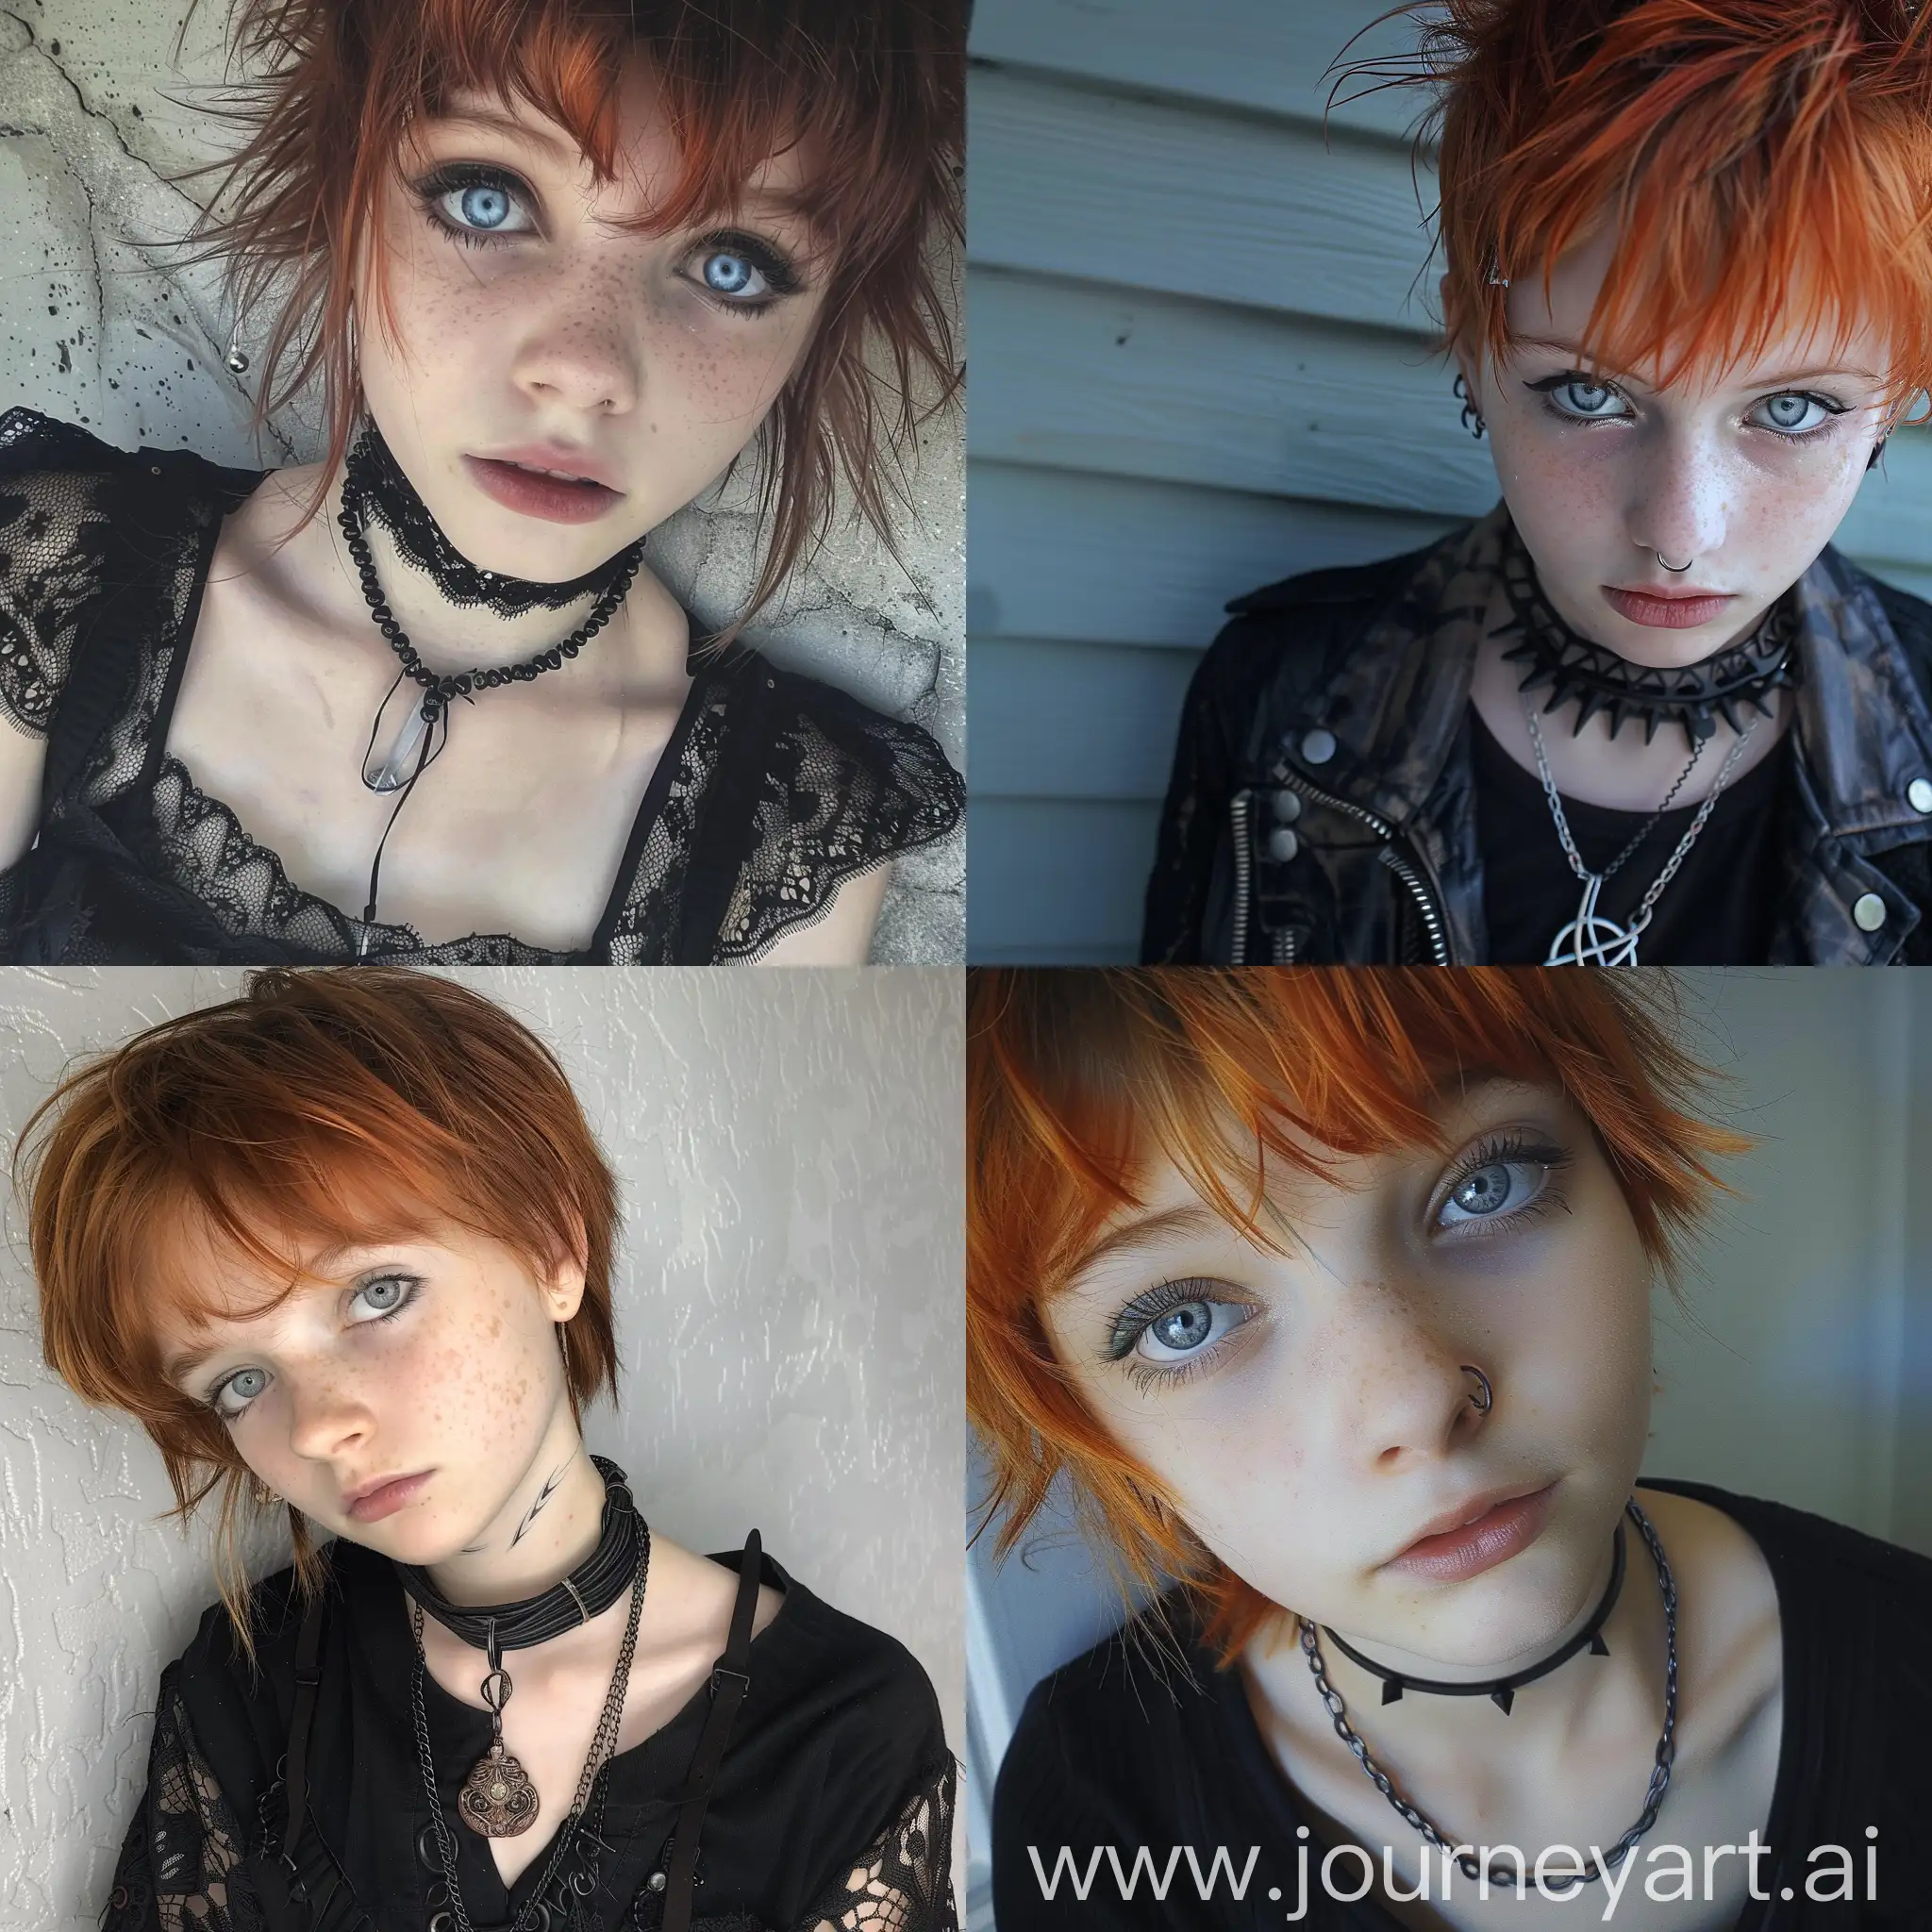 Goth-Teen-Girl-with-Red-Pixie-Cut-and-Icy-Blue-Eyes